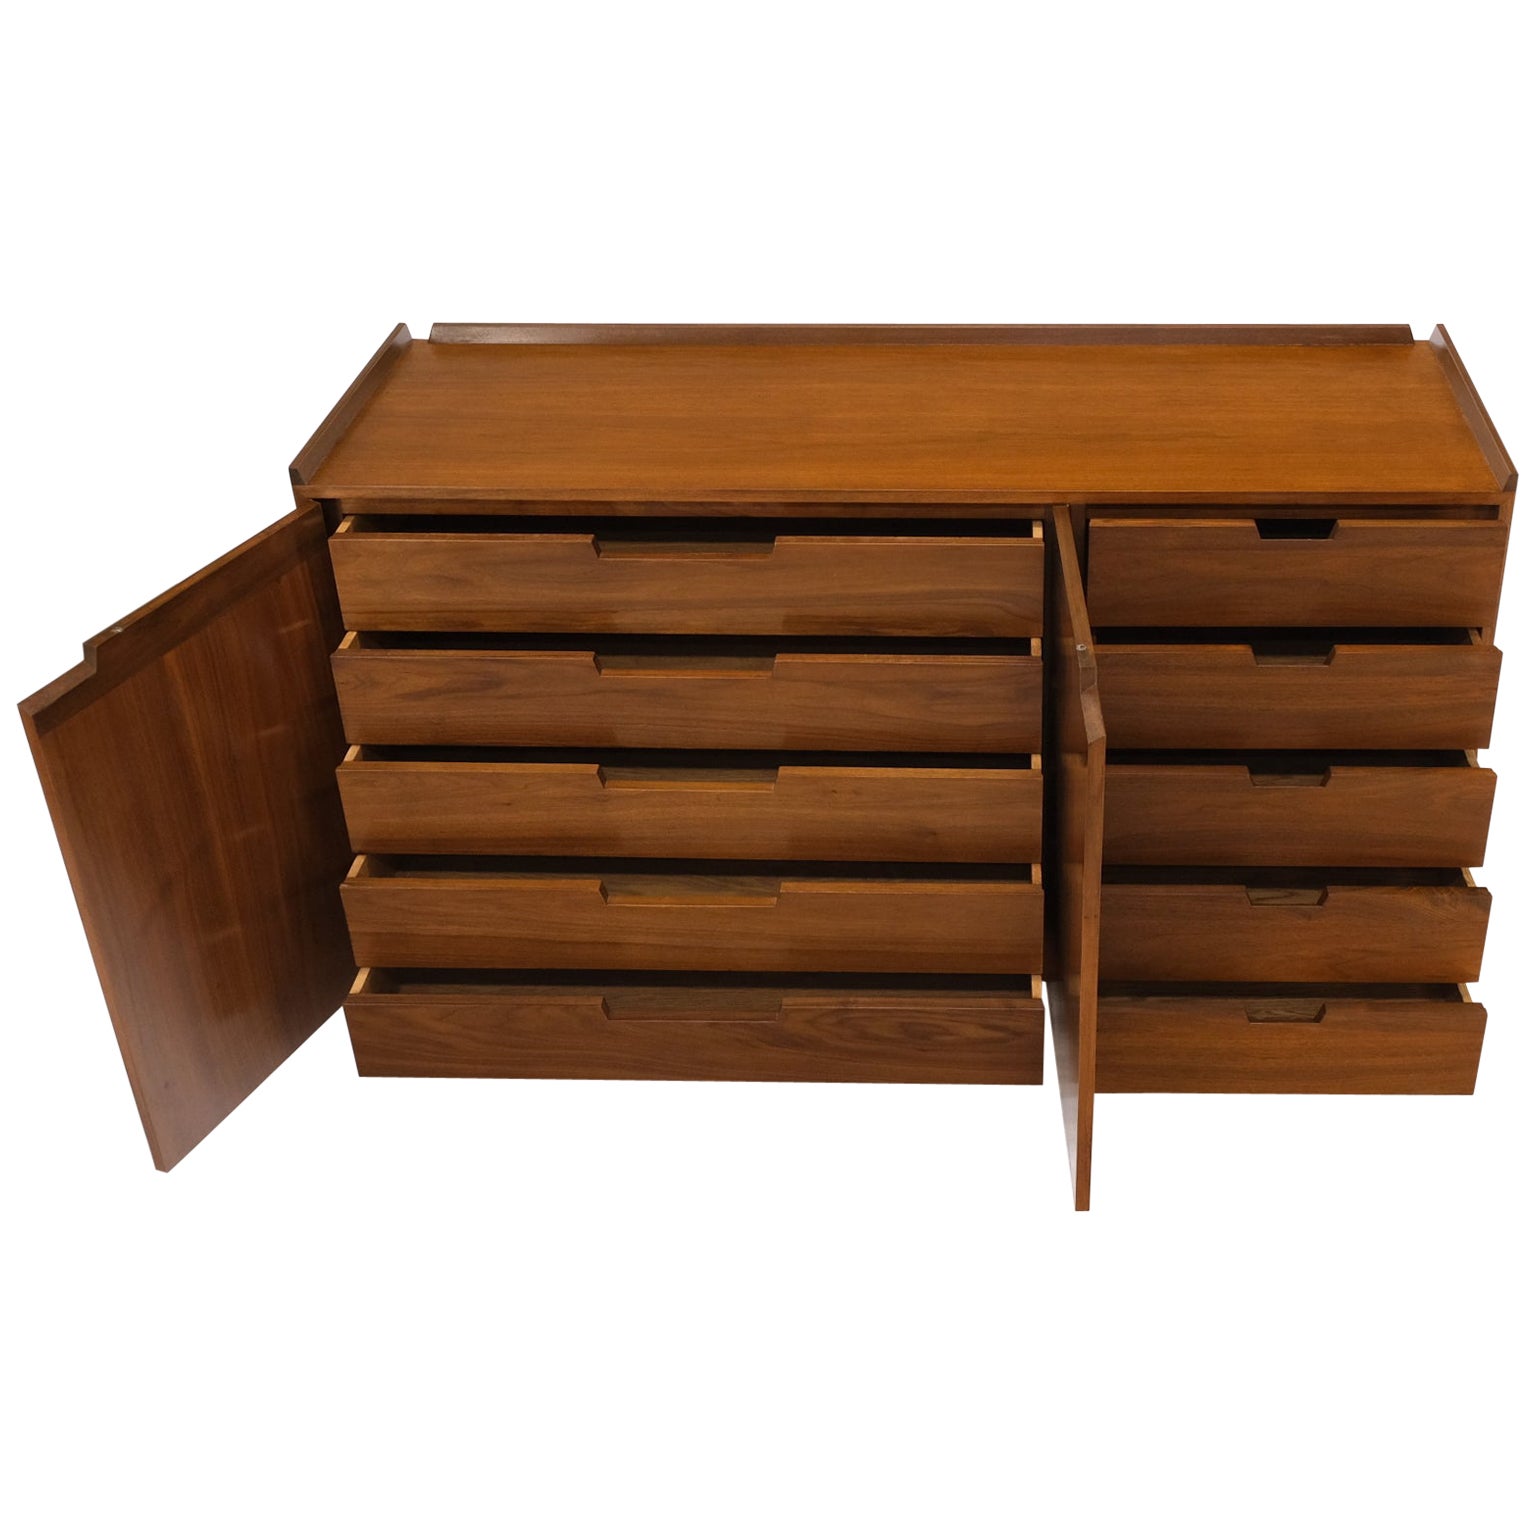 The Modernity 10 Drawers Walnut Gallery Top Dresser Credenza Double Doors